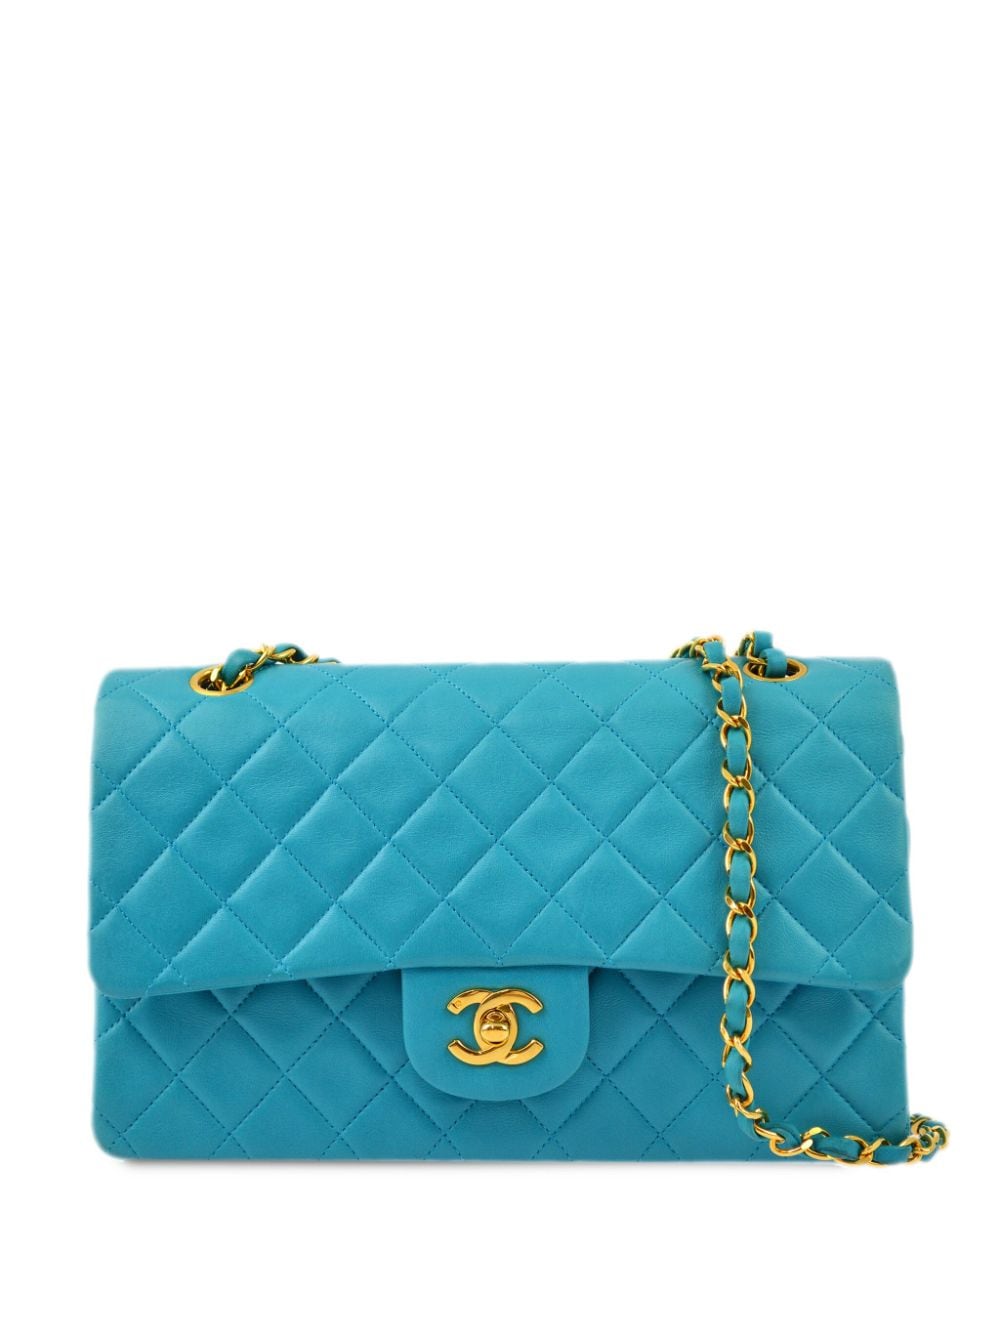 Pre-owned Chanel 1992 Medium Double Flap Shoulder Bag In Blue